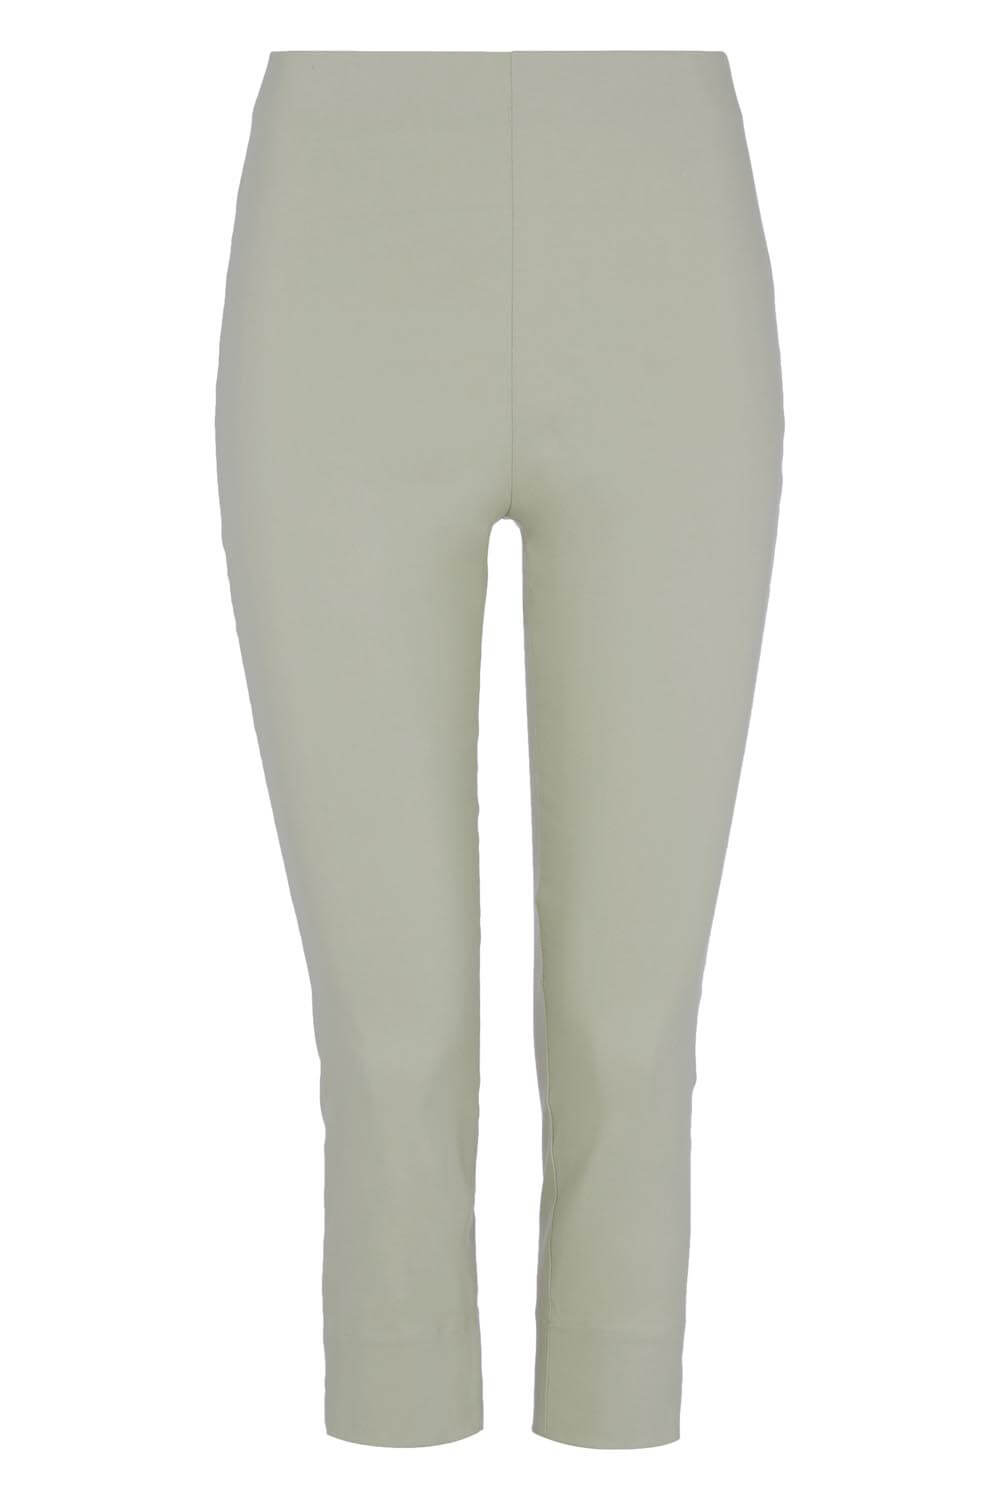 KHAKI Cropped Stretch Trouser, Image 5 of 5